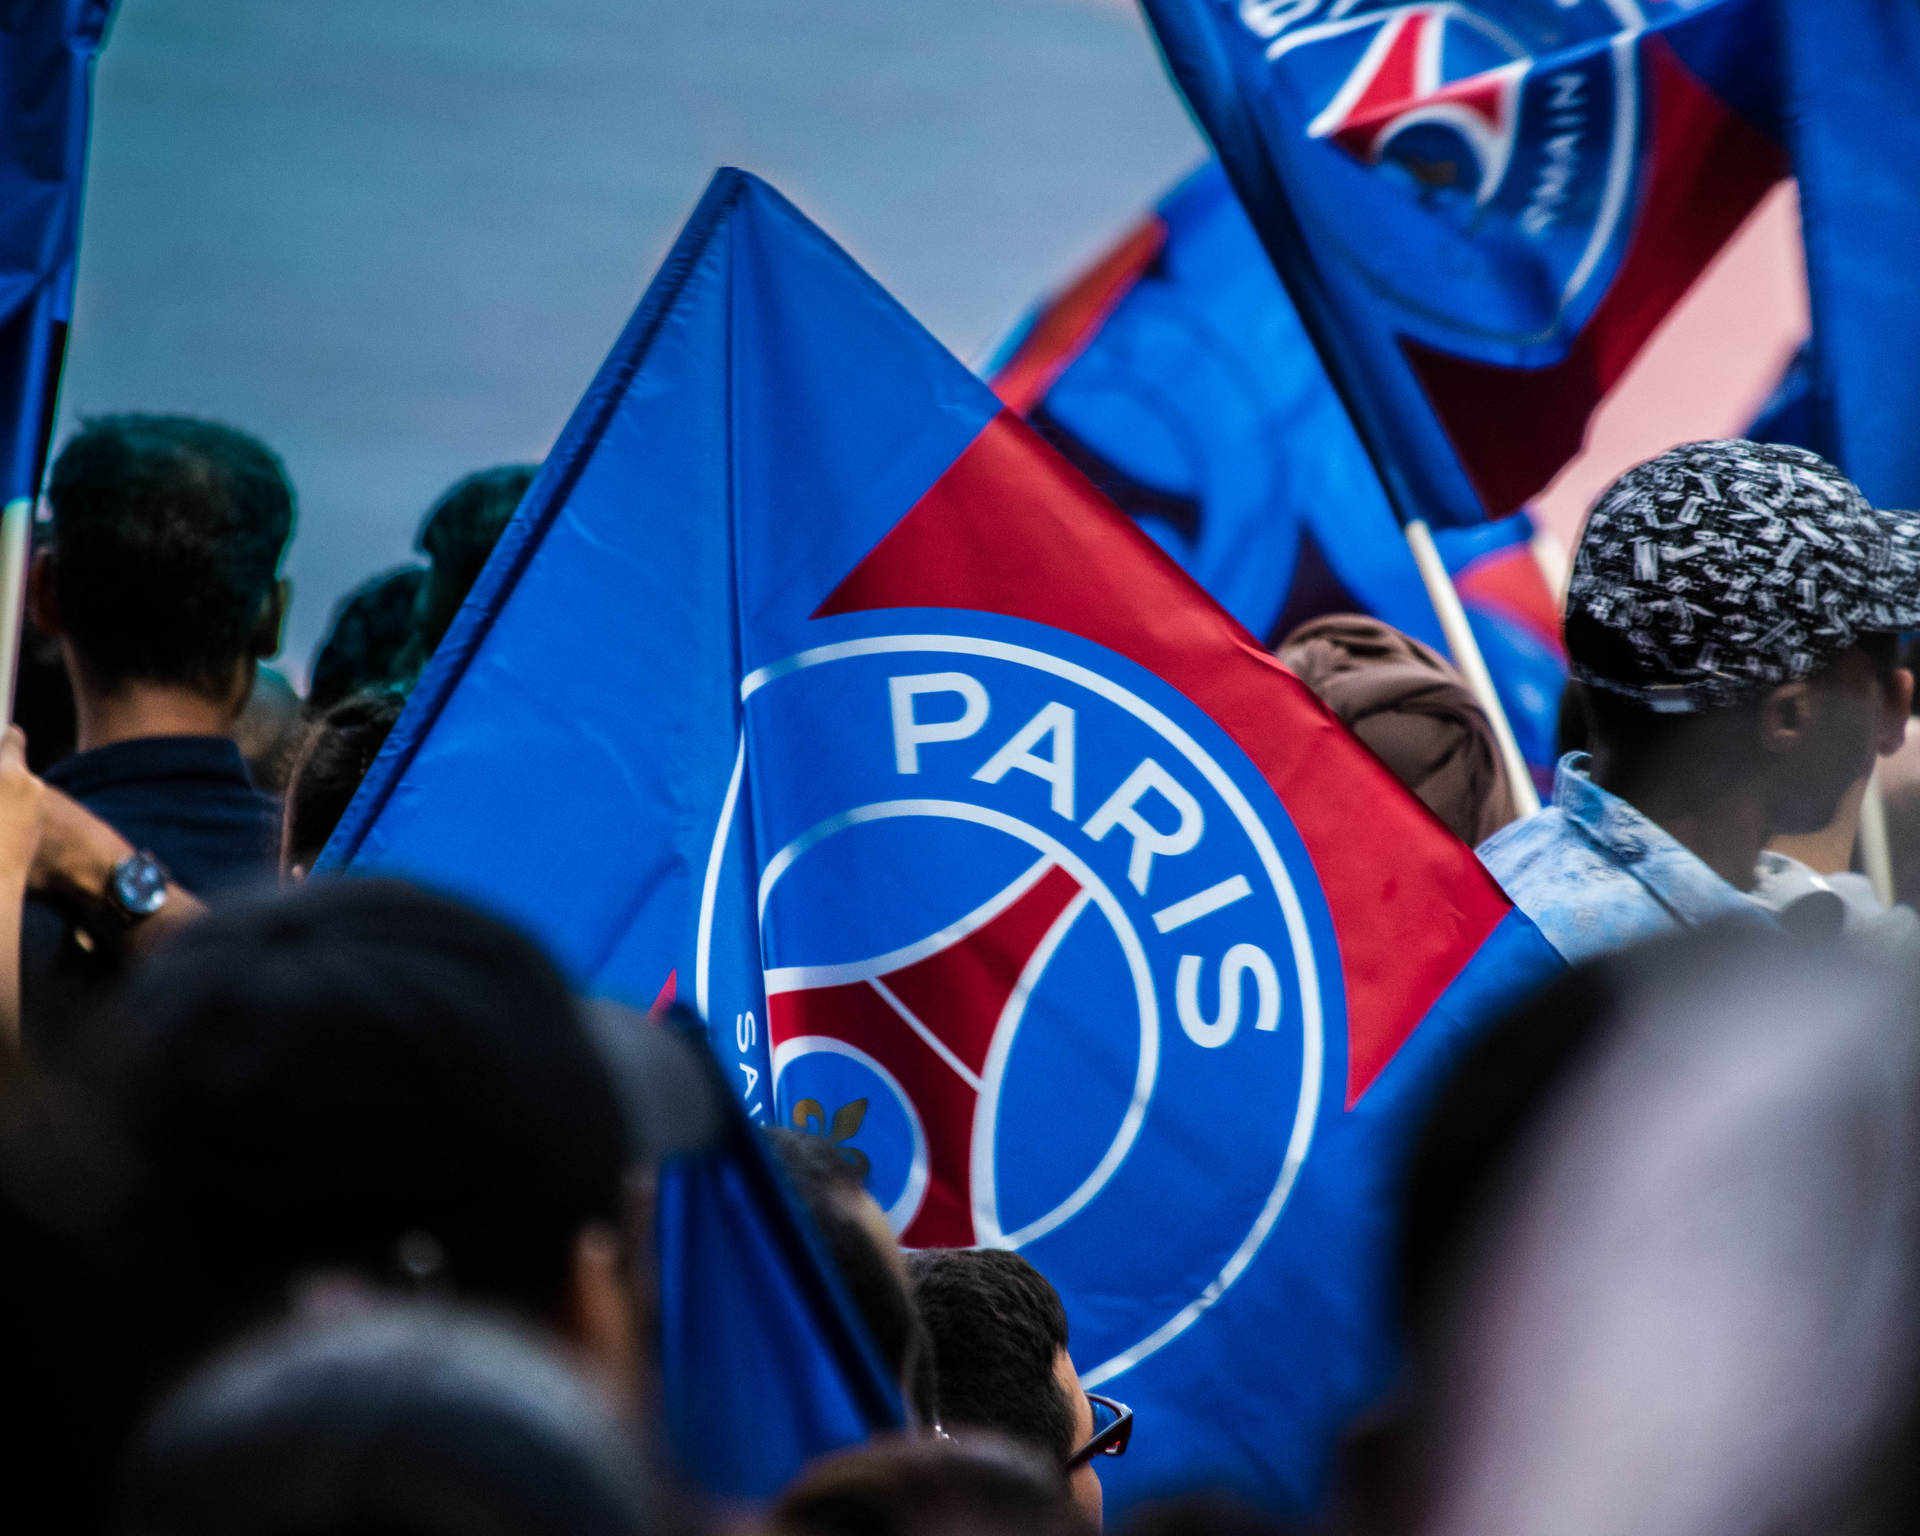 Psg Football Crowd Flags Background